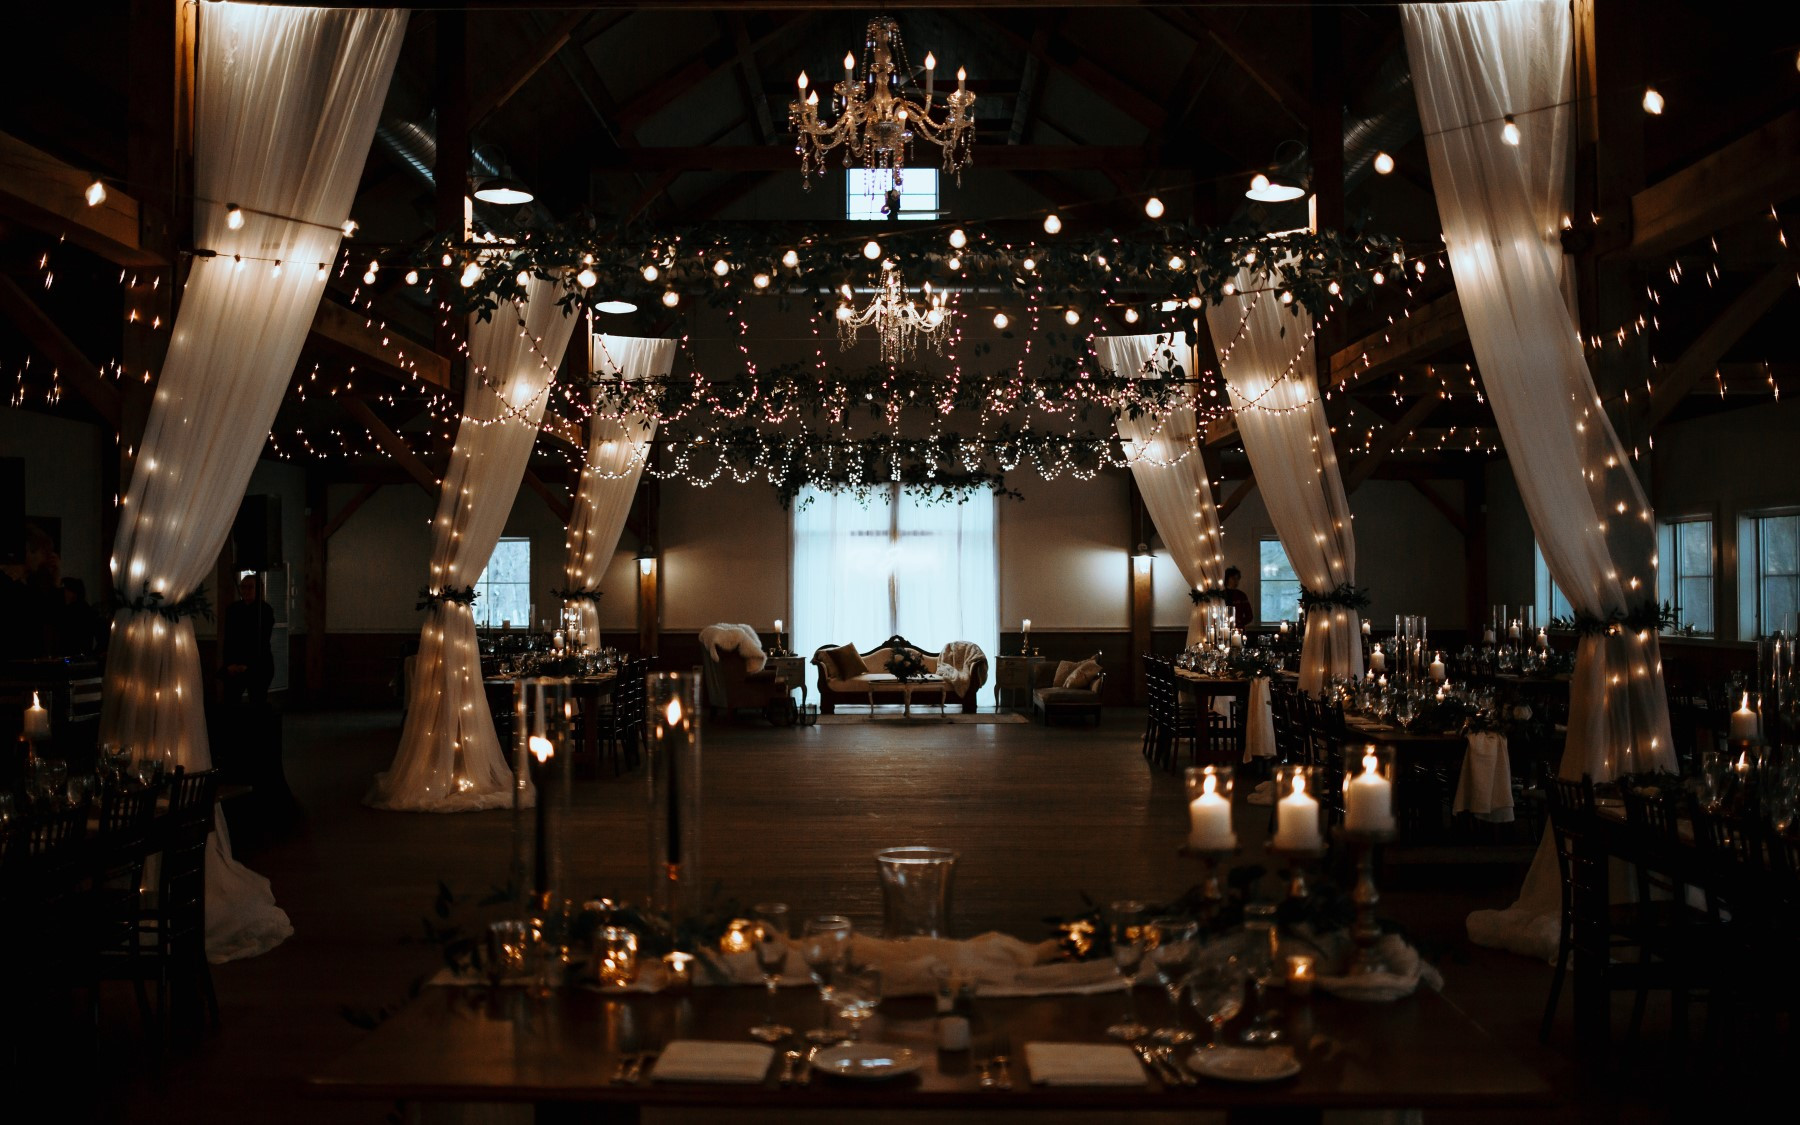 event barn covered in lighting, drapery, chandeliers, floral arrangements with seating at end in front of windows.